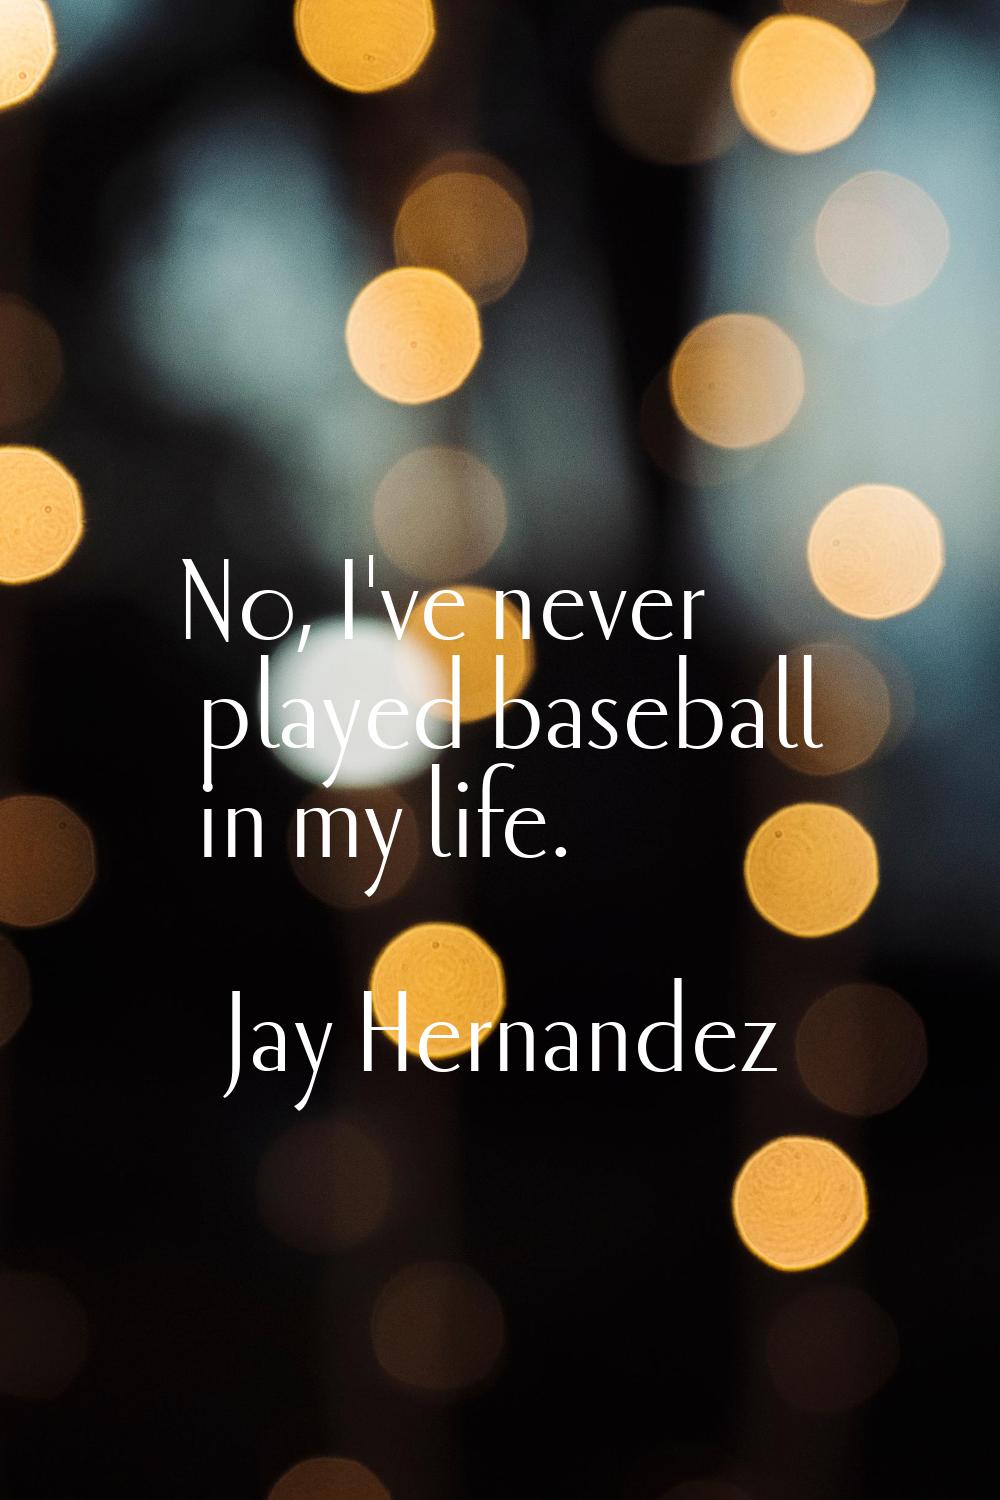 No, I've never played baseball in my life.